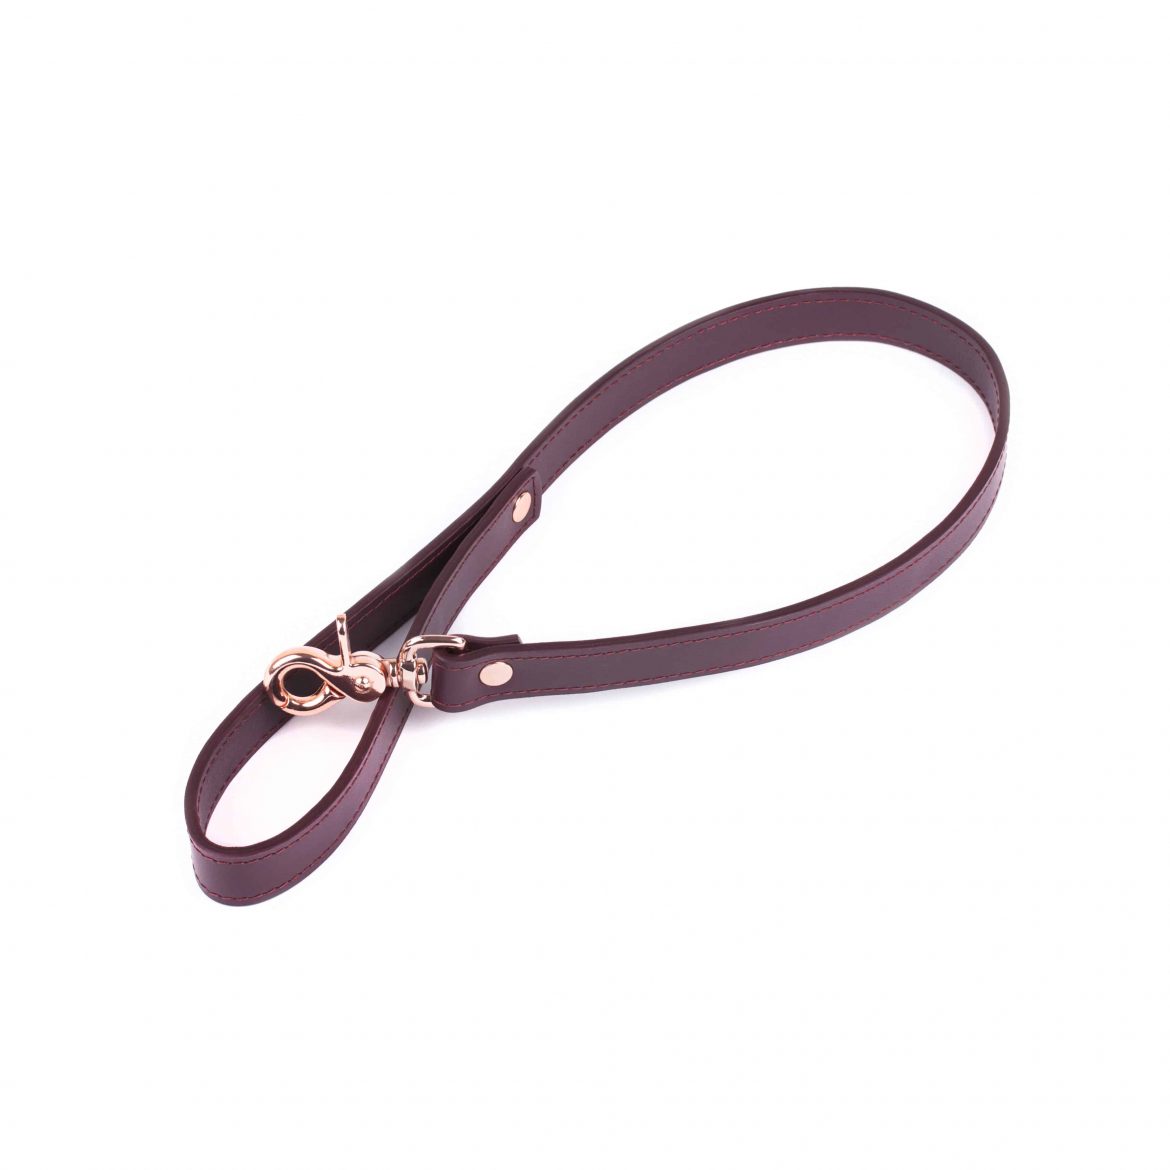 bdsm long leather leash 17 1 scaled